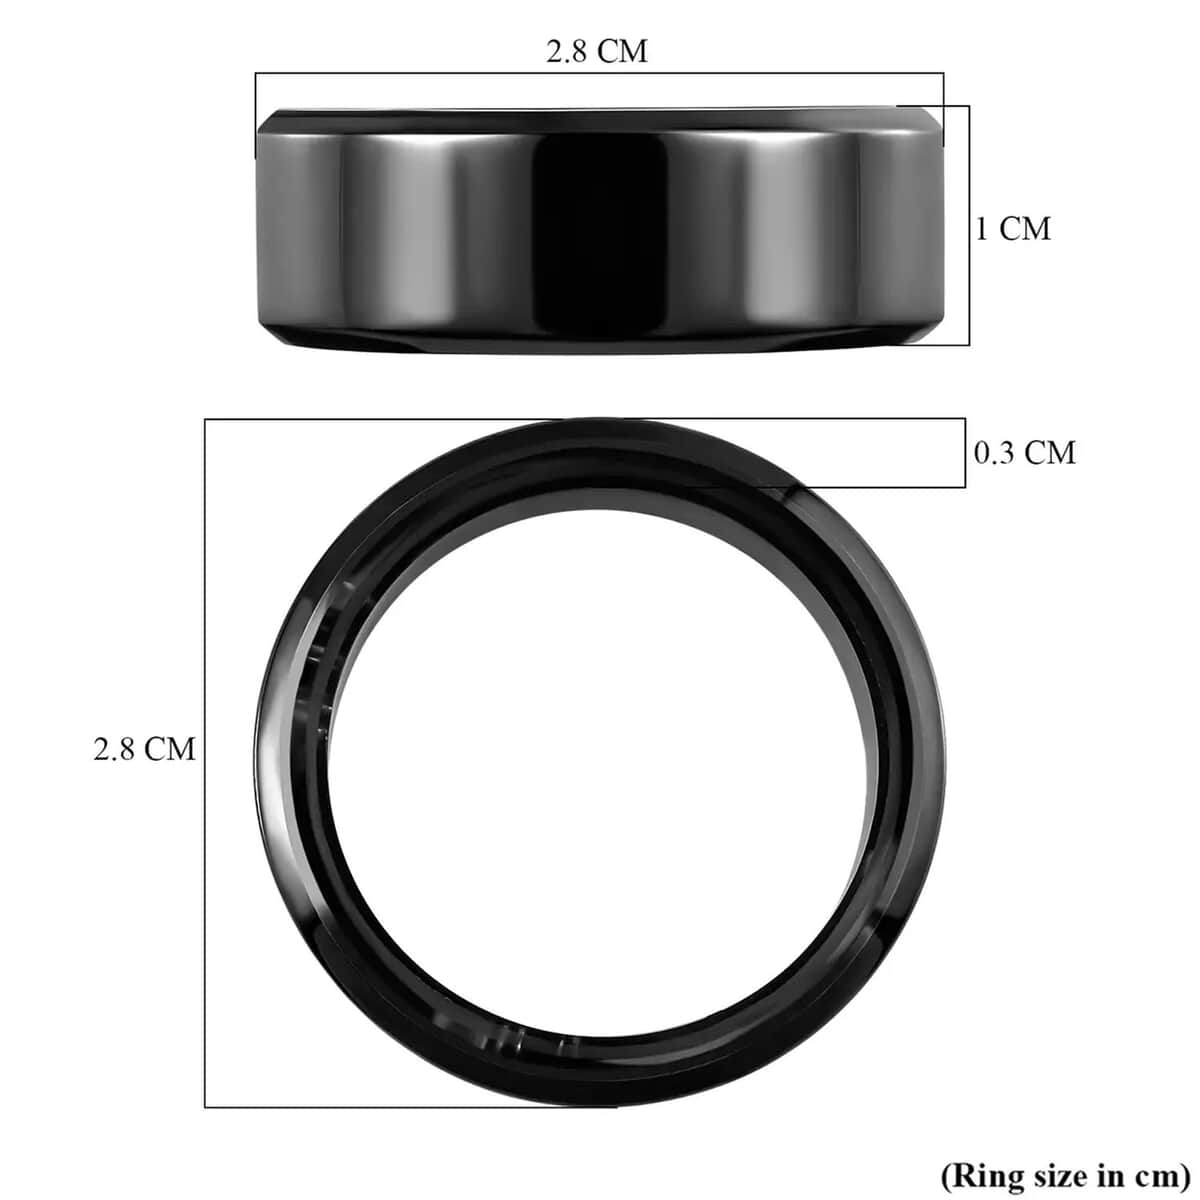 Soulsmart Multifunctional Health Tracker Smart Ring (Size 10.0) in ION Plated Black Stainless Steel (Compatible with Android 5.0+ & Apple IOS 10.0+ Systems) (Del. in 10-15 Days) image number 7